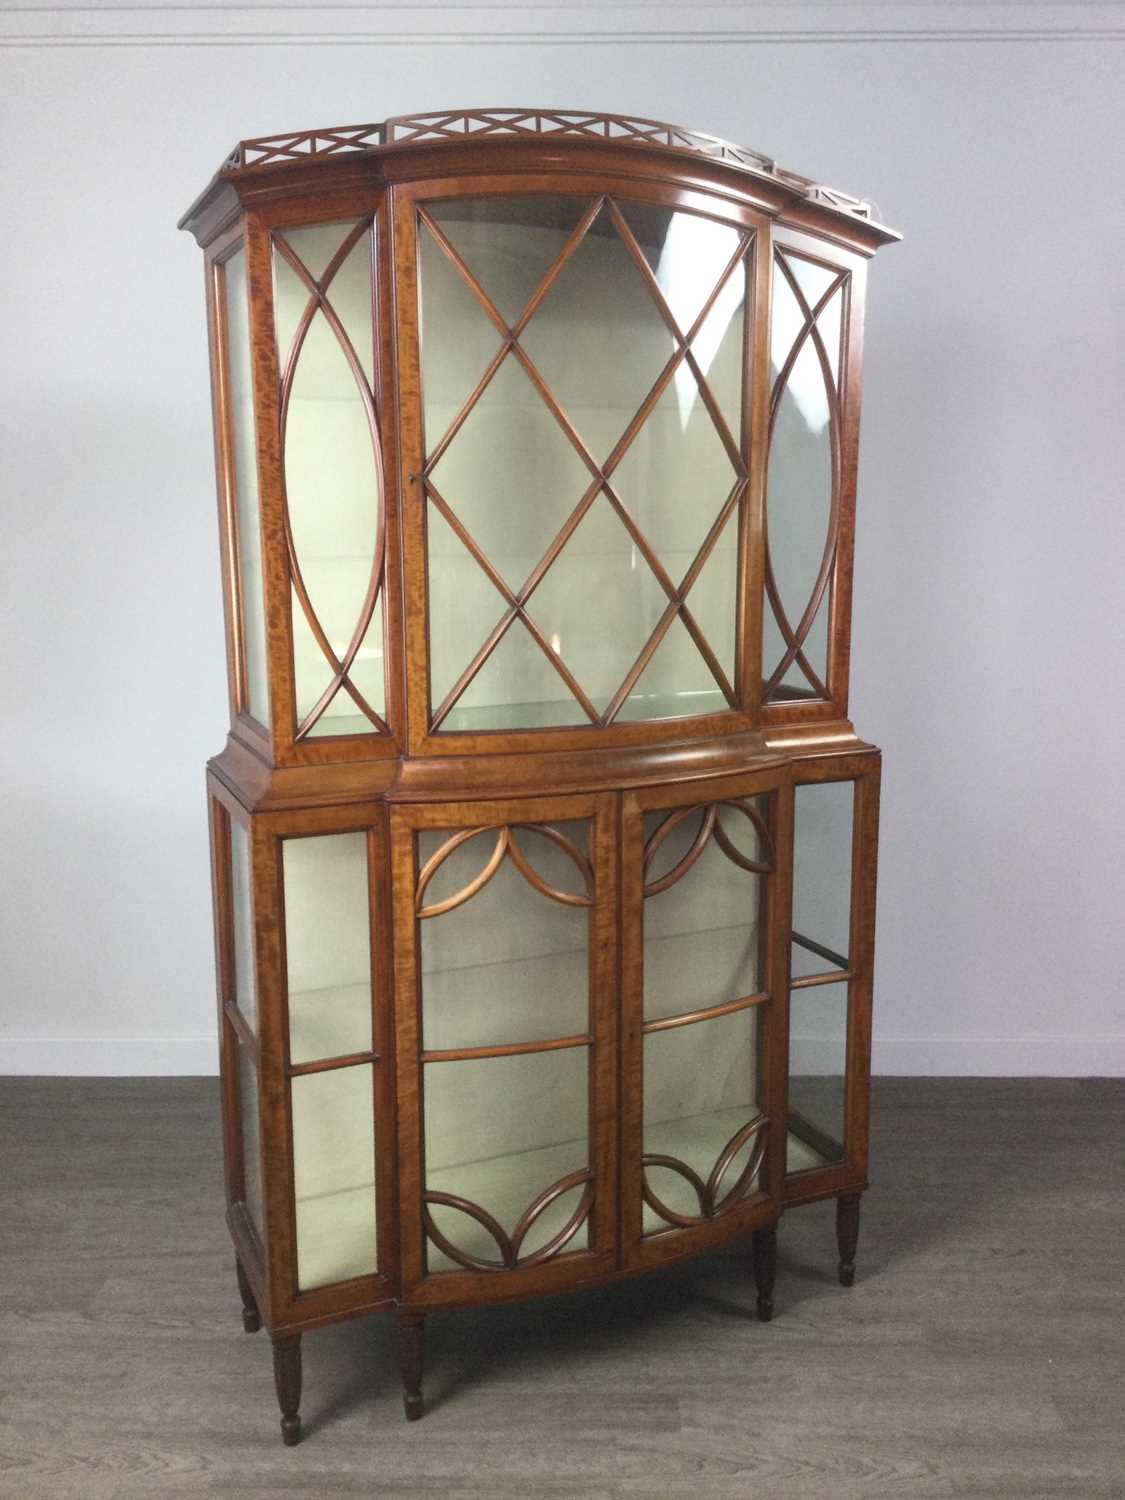 Lot 822 - A SATINWOOD DISPLAY CABINET BY MAPLE & CO